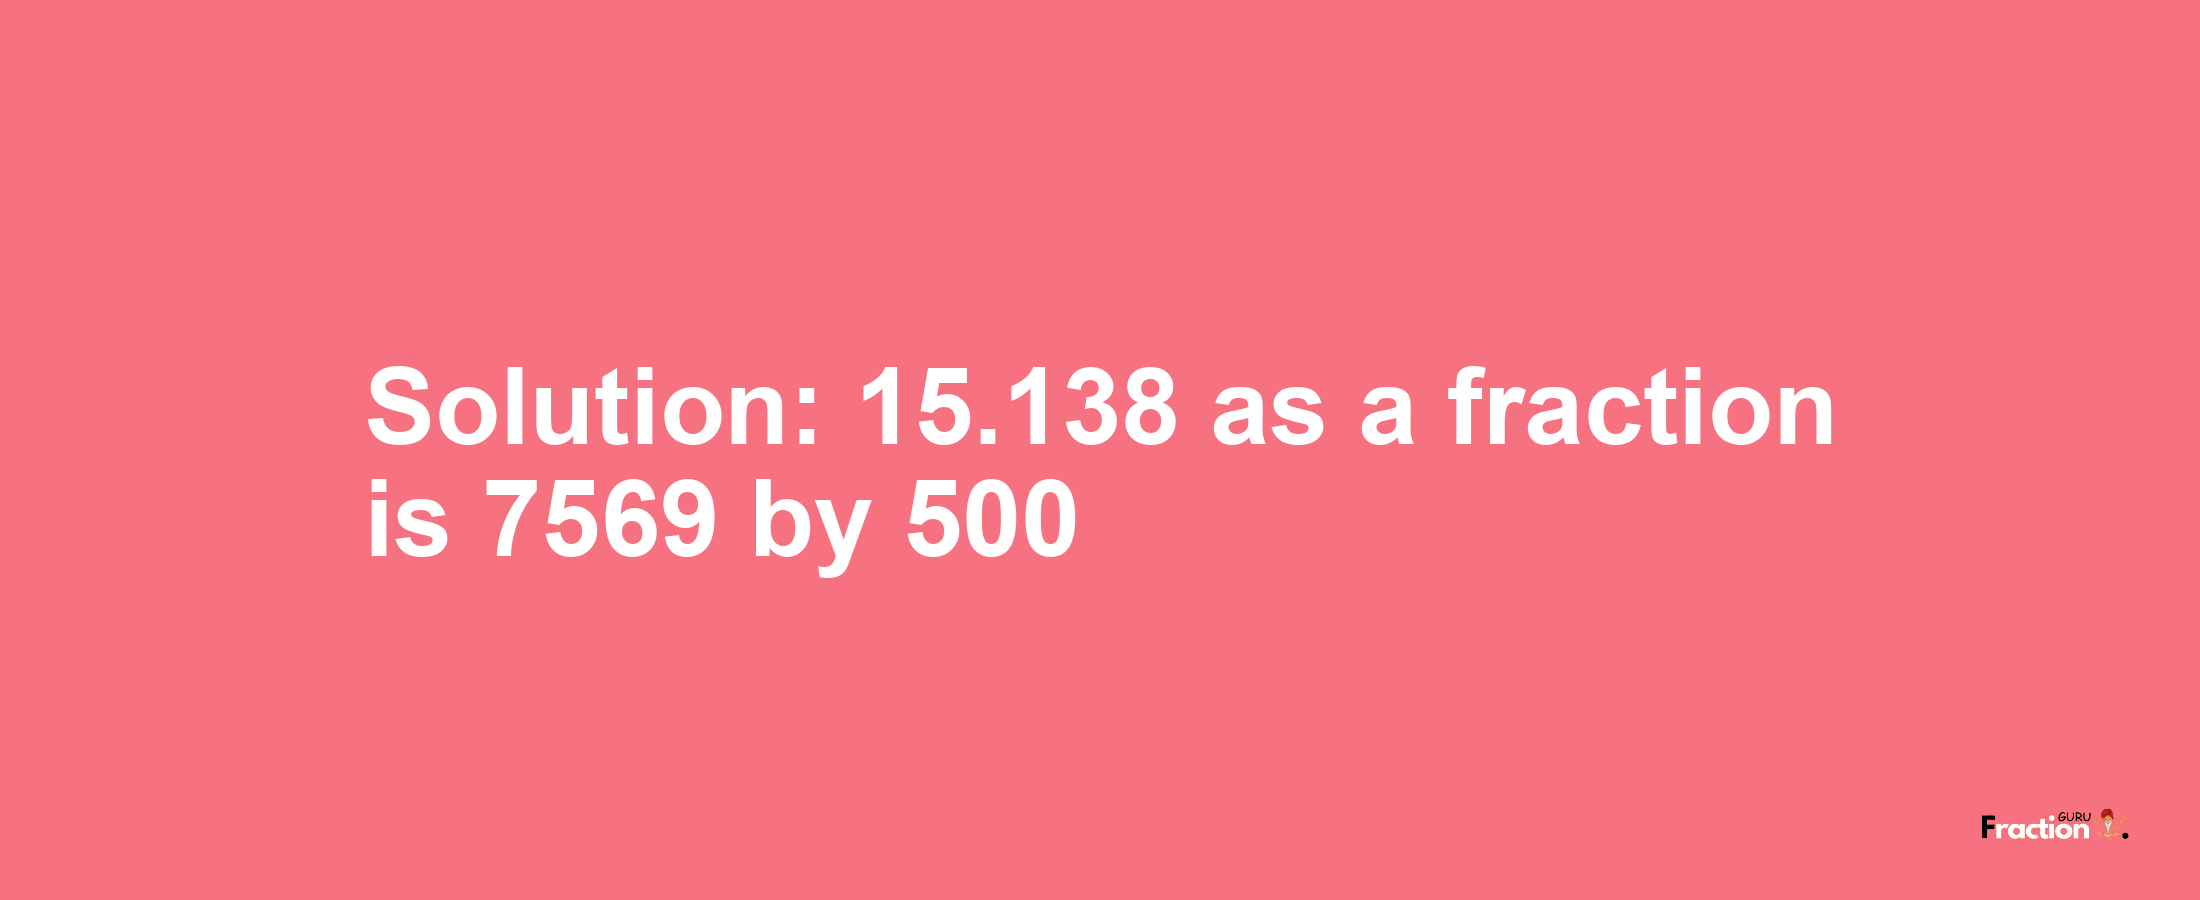 Solution:15.138 as a fraction is 7569/500